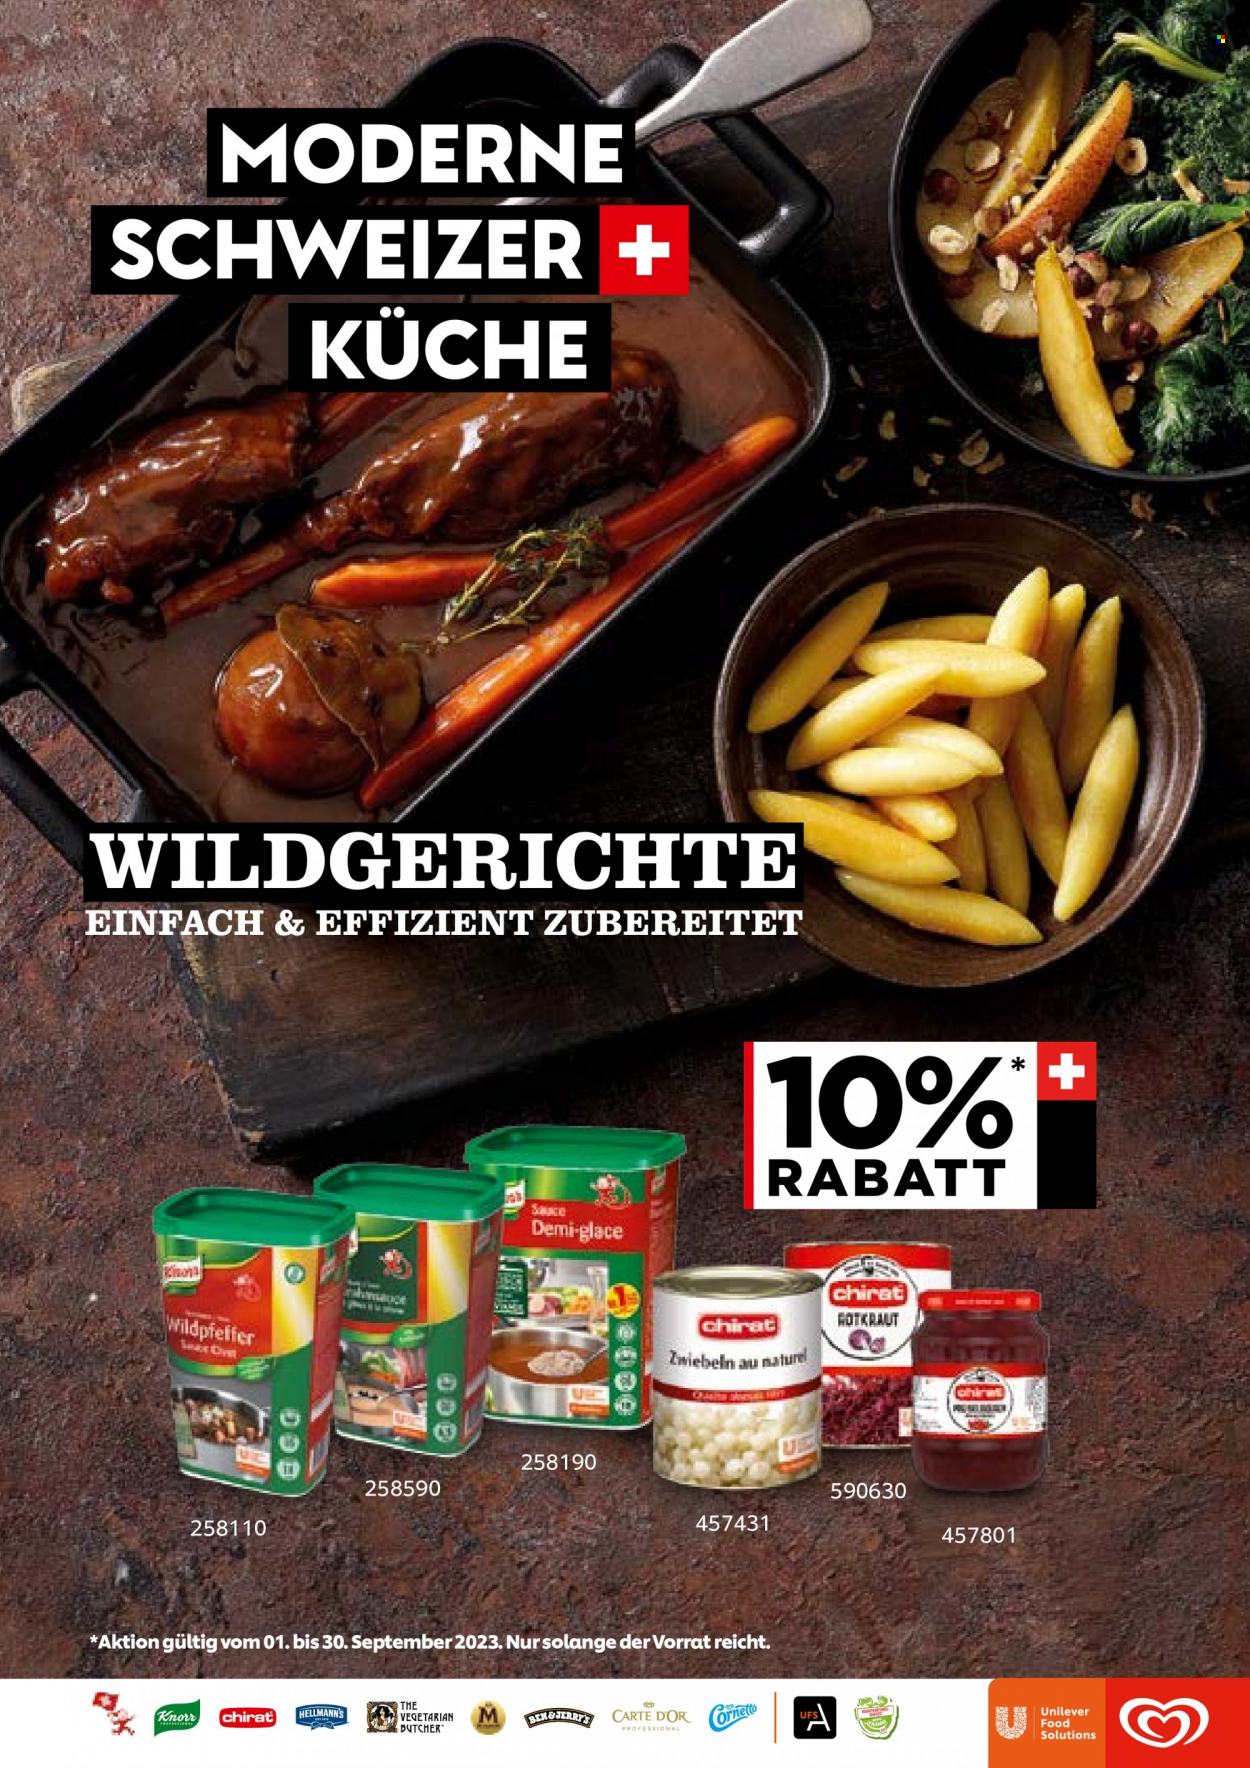 Catalogue TransGourmet - 1.9.2023 - 30.9.2023. Page 12.